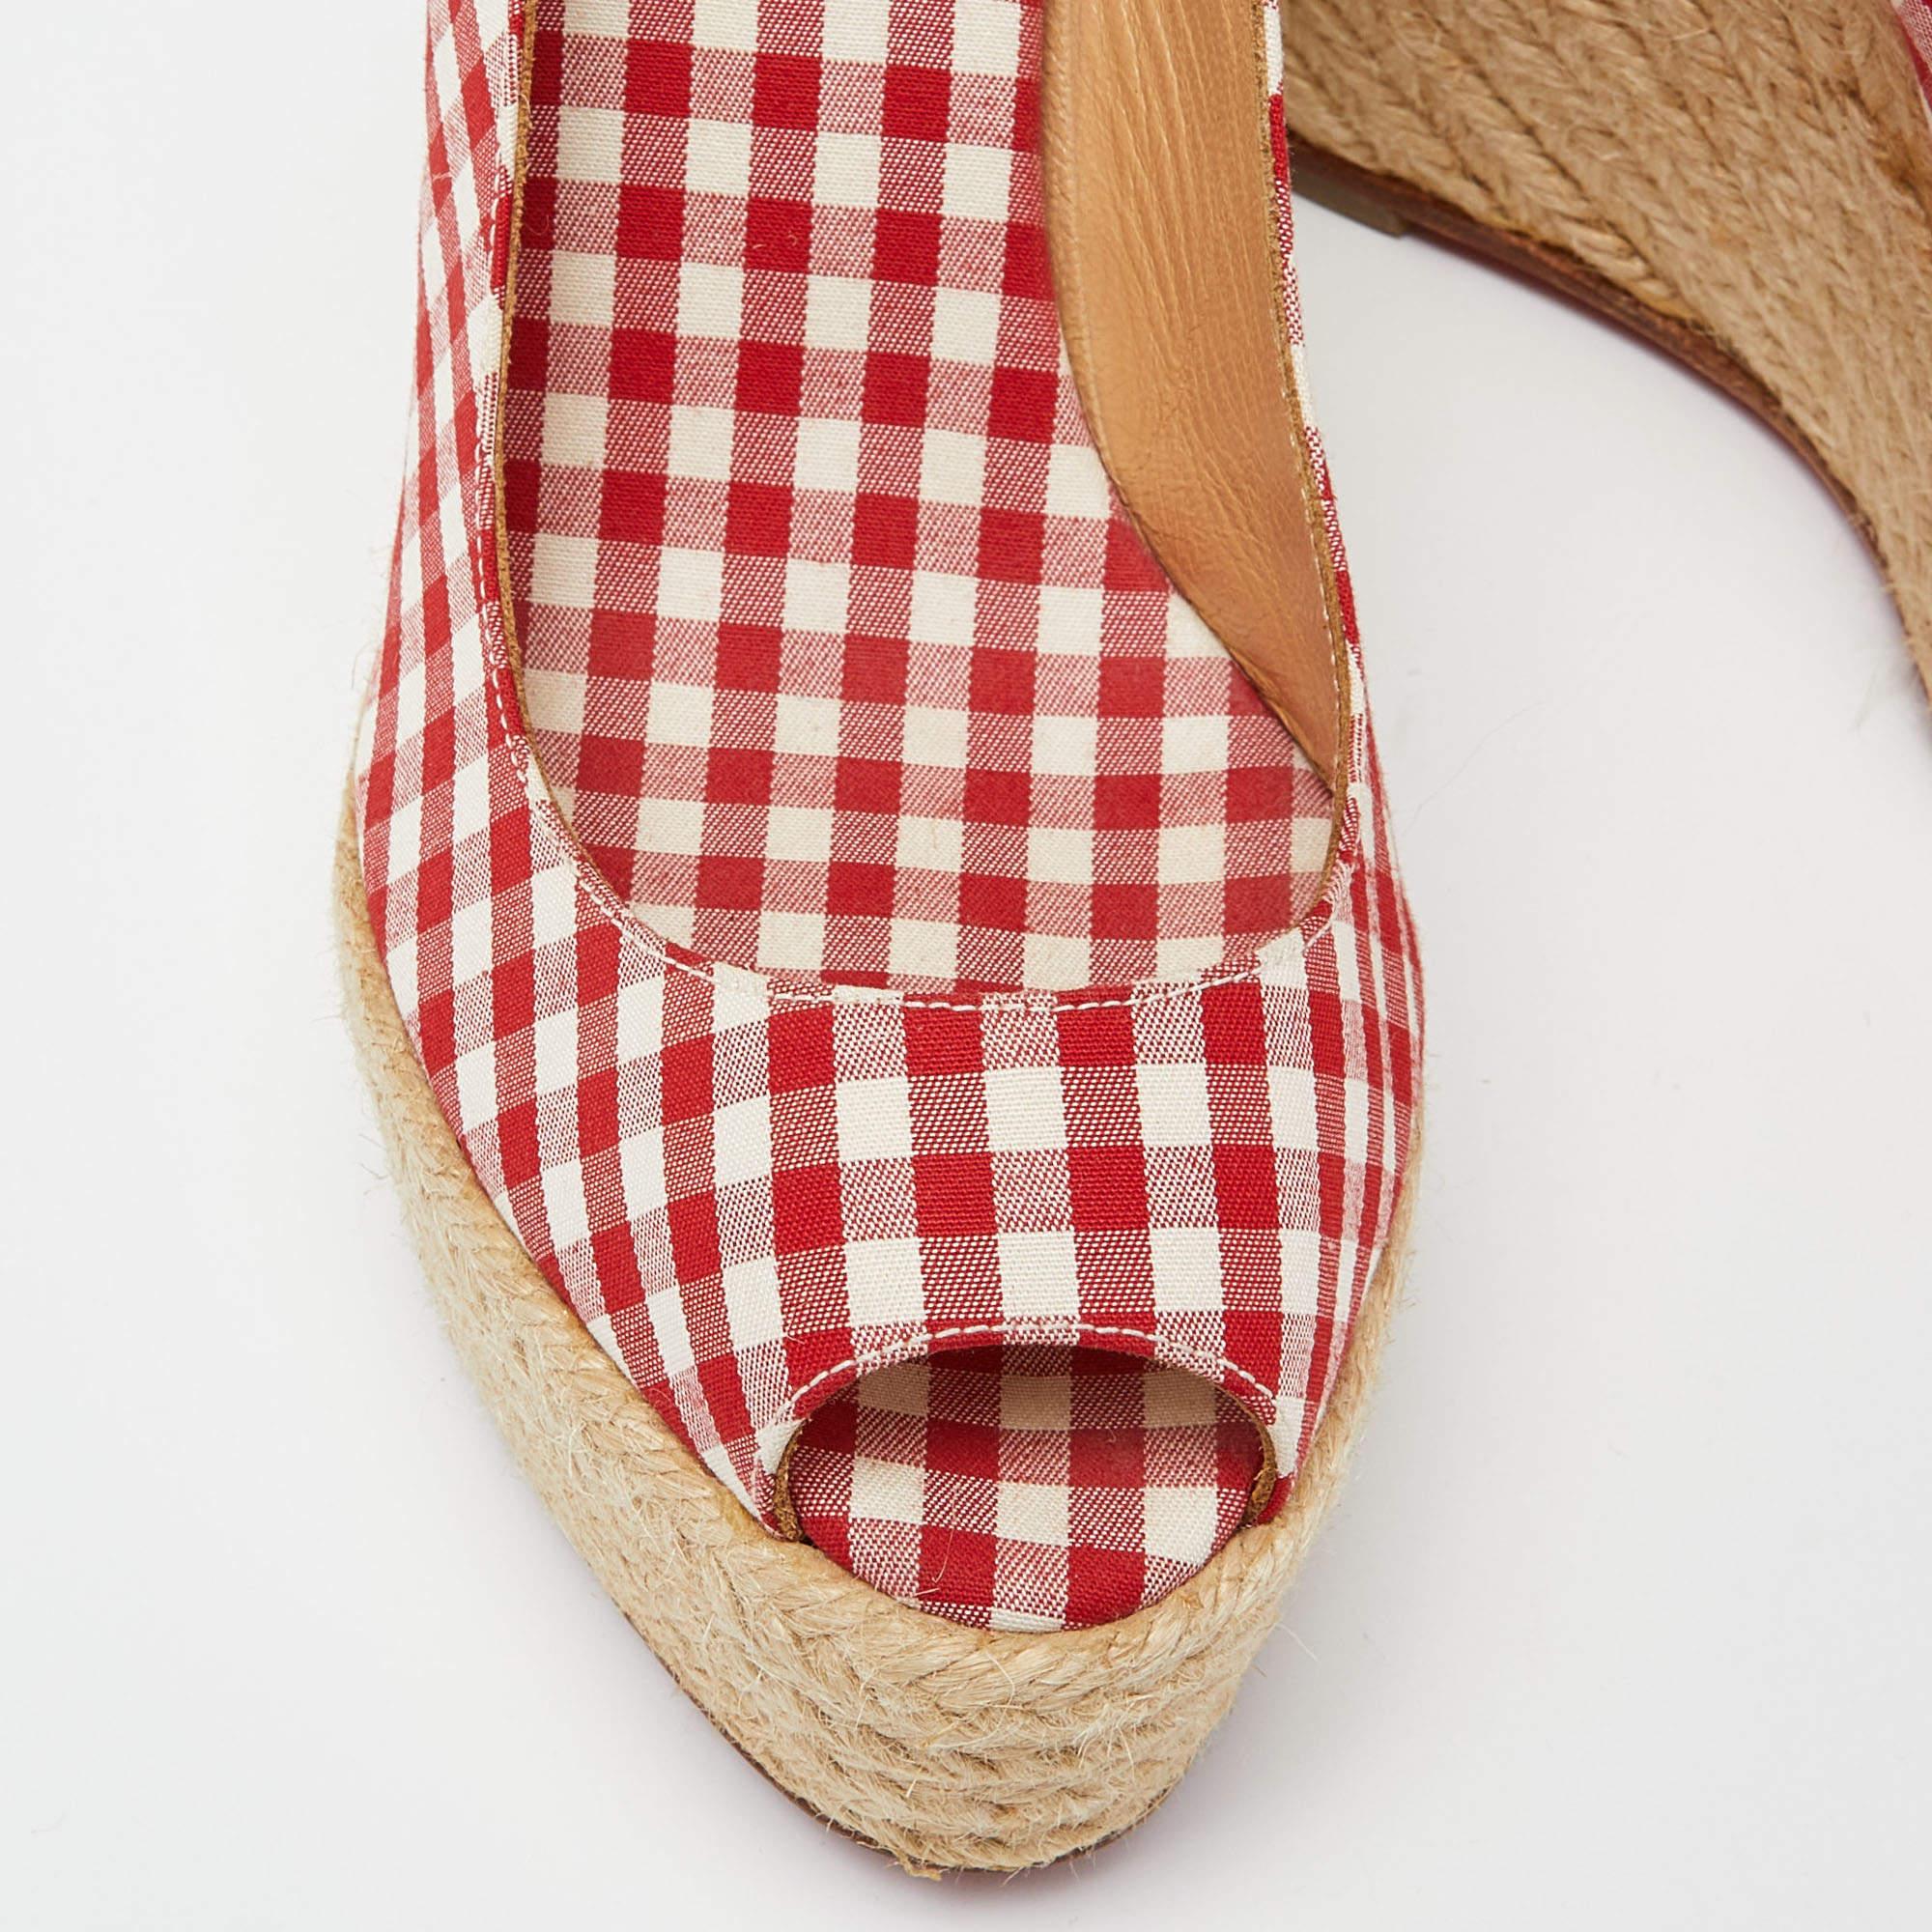 Christian Louboutin Red/White Gingham Fabric Menorca Espadrille Wedge Size 37 For Sale 3